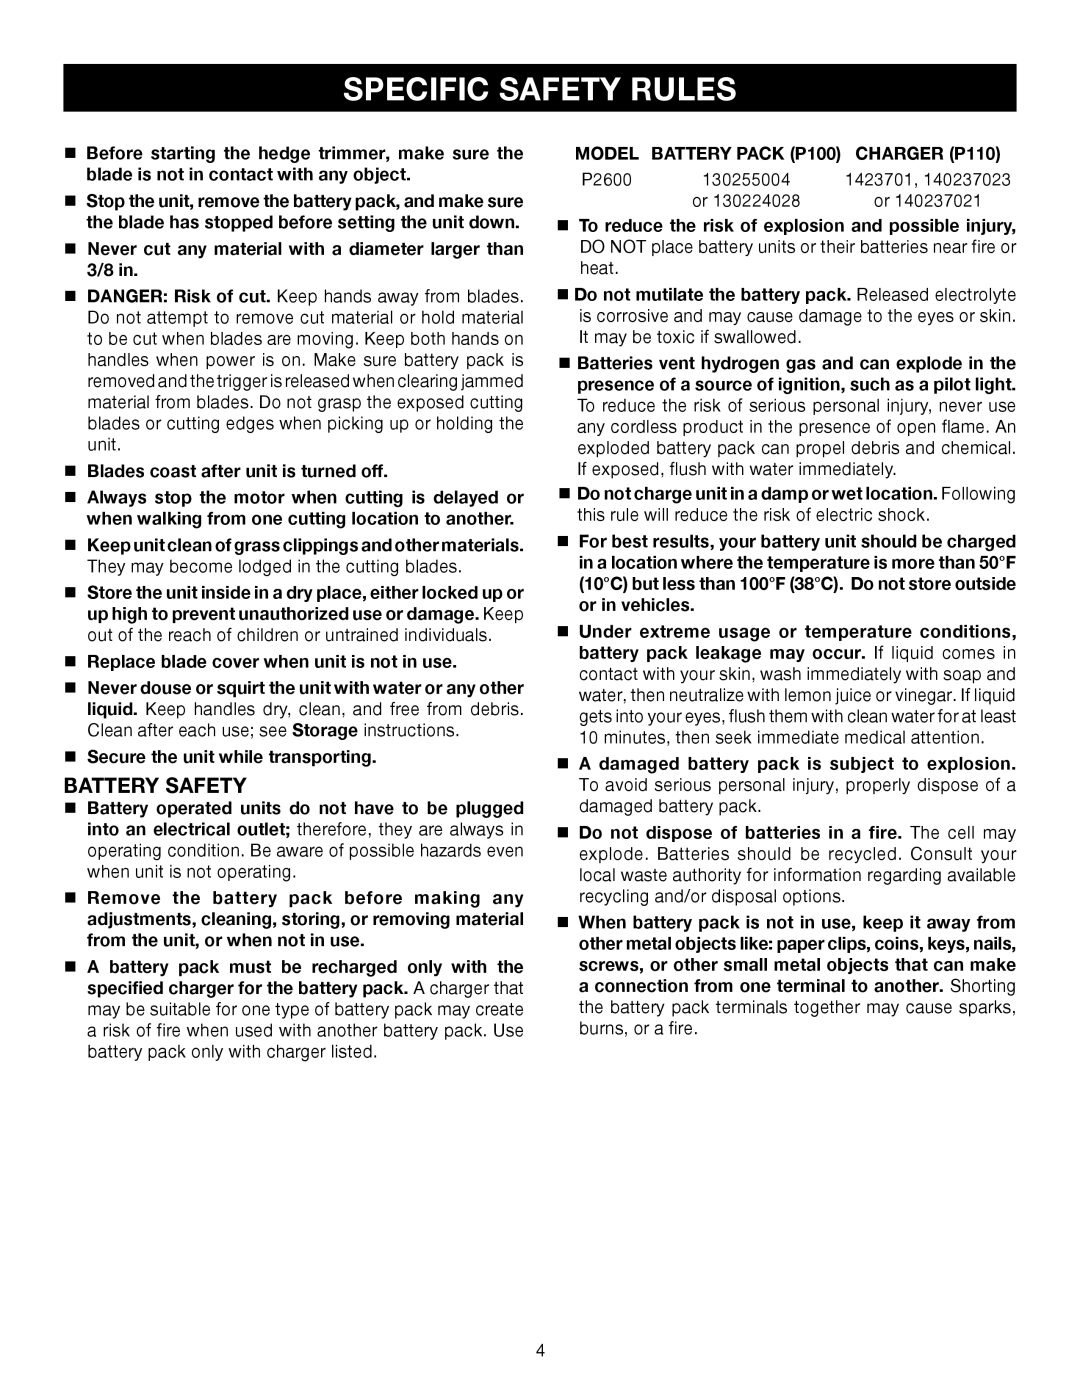 Ryobi Outdoor P2600 manual Specific Safety Rules, Battery Safety 